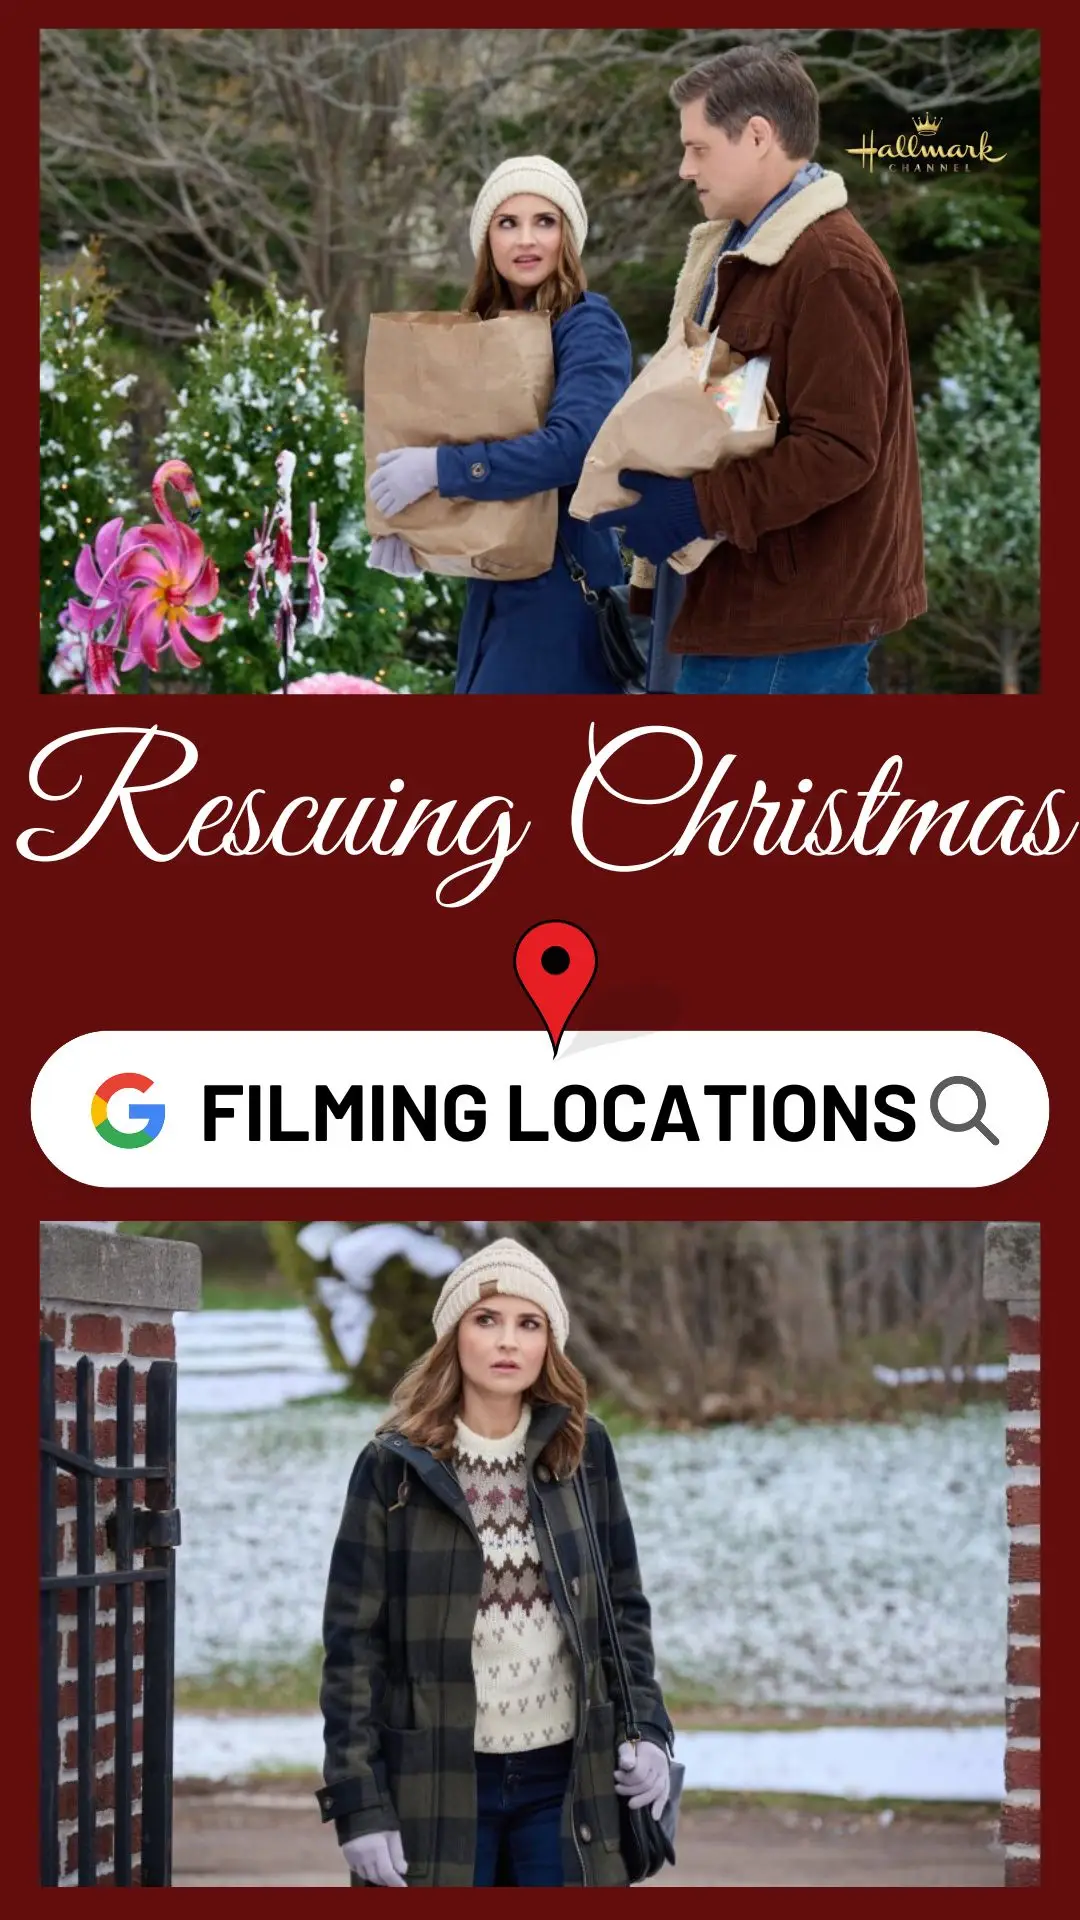 Rescuing Christmas Filming Locations